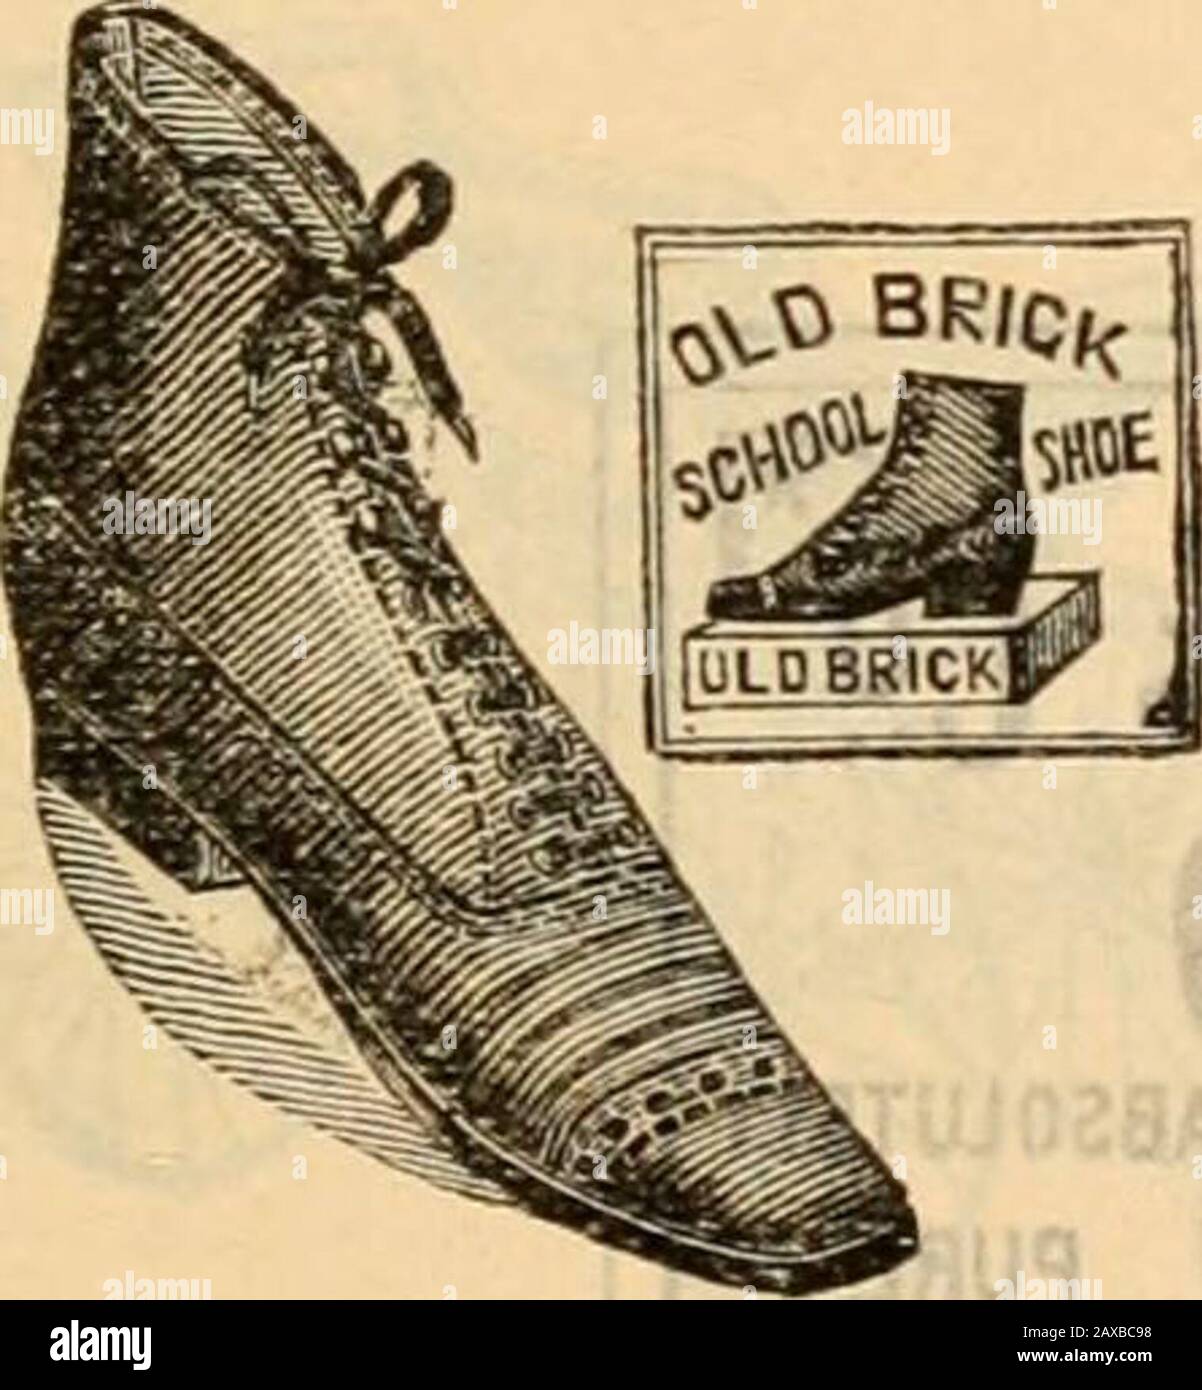 f and f school shoes